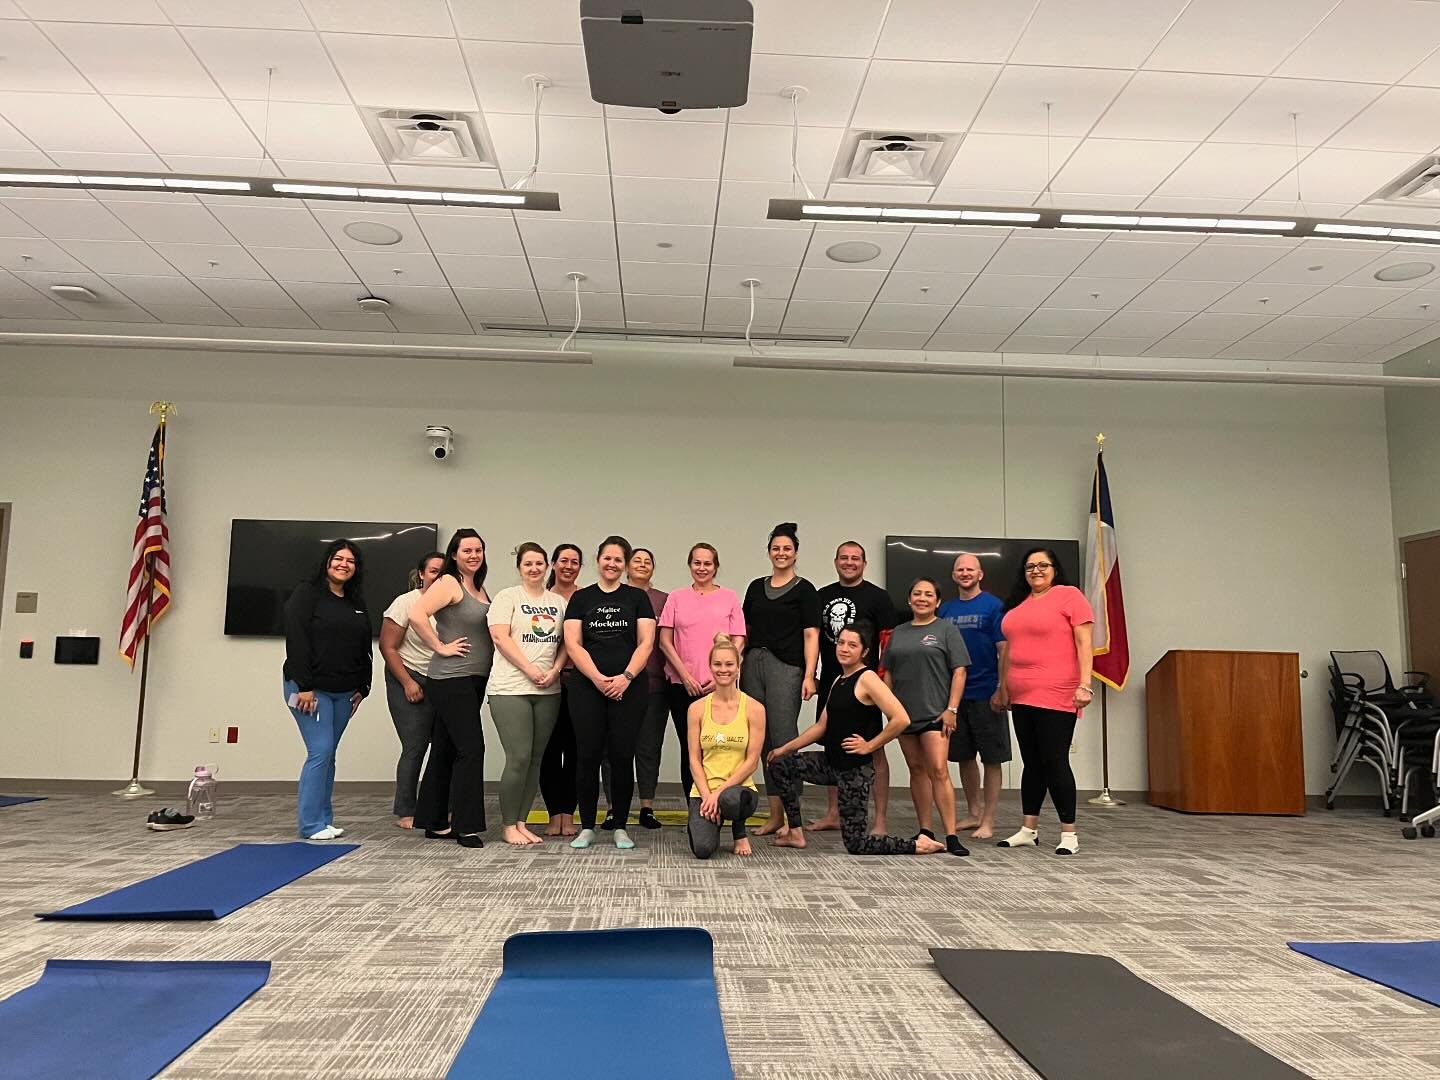 Thank you to all who participated in yoga with the City of New Braunfels! We loved hosting and supporting your &ldquo;𝑩𝑬 𝑨𝑪𝑻𝑰𝑽𝑬&rdquo; initiative!🤩 @cityofnbtx